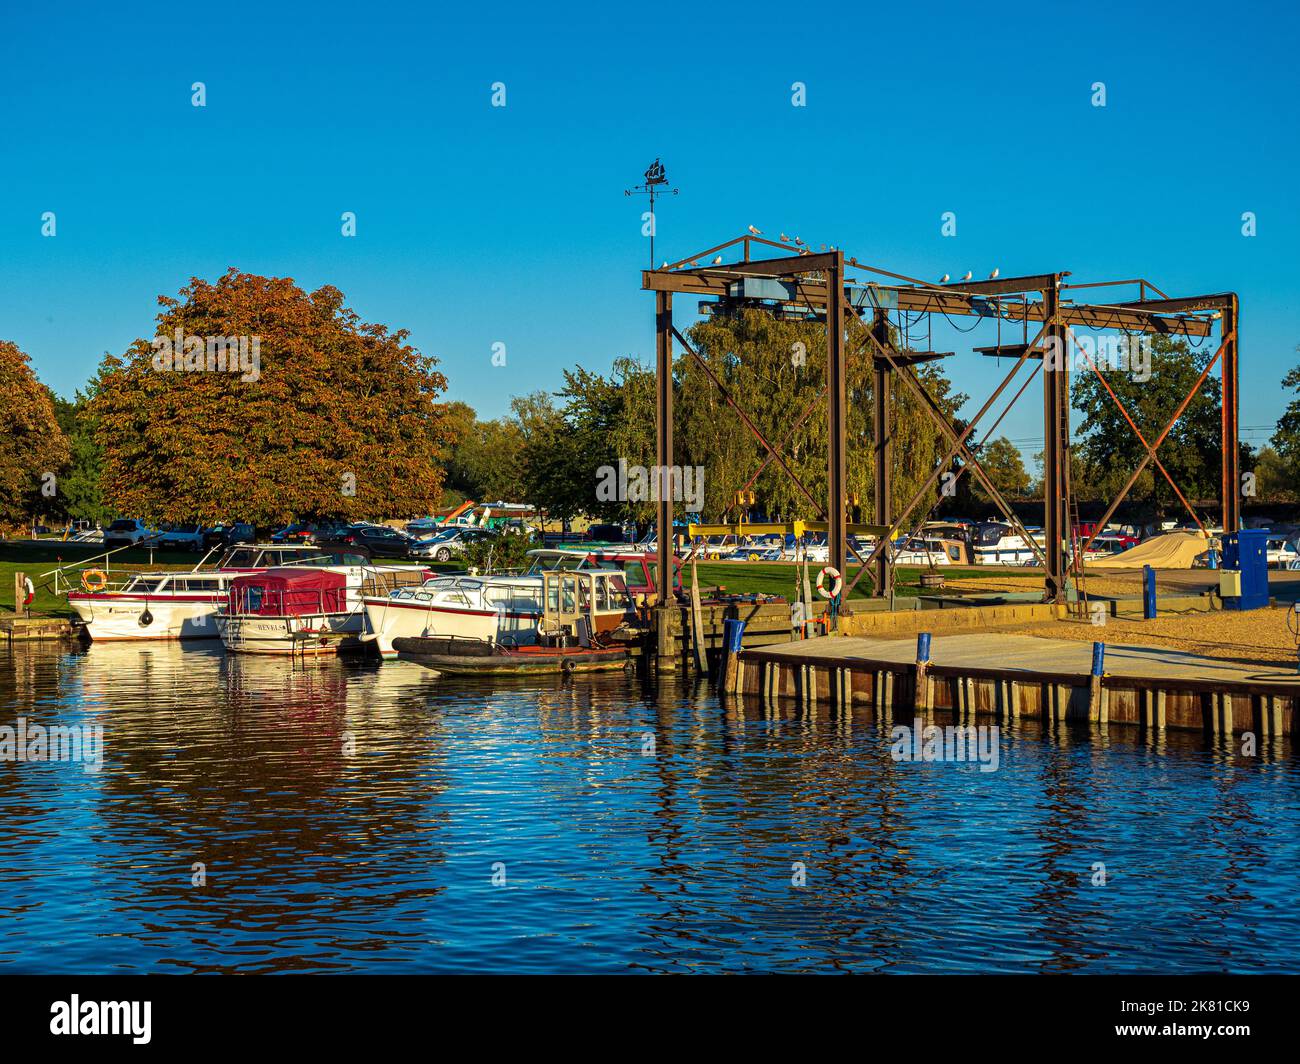 Cathedral Marina di Ely sul fiume Great Ouse, con l'ascensore. Ely Marina. Fiume Ouse Marina Ely. Foto Stock